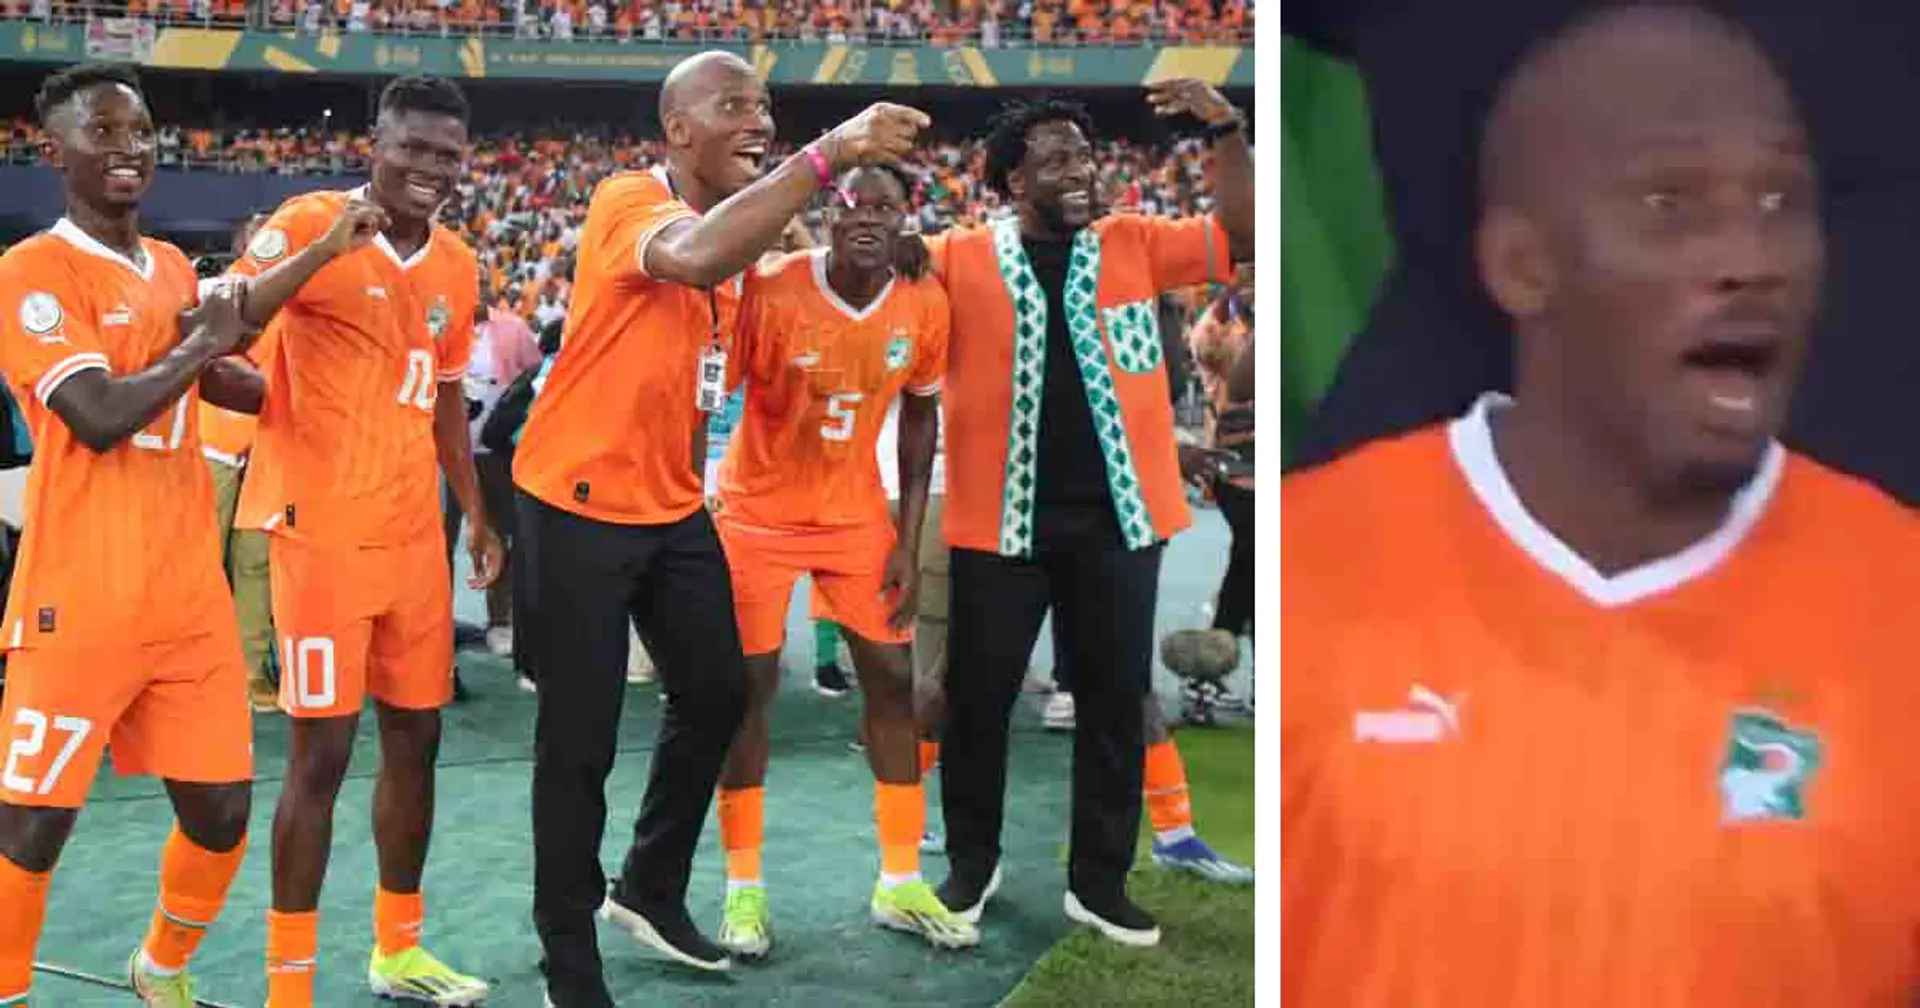 Spotted: Drogba's crazy celebrations as Ivory Coast lift AFCON title